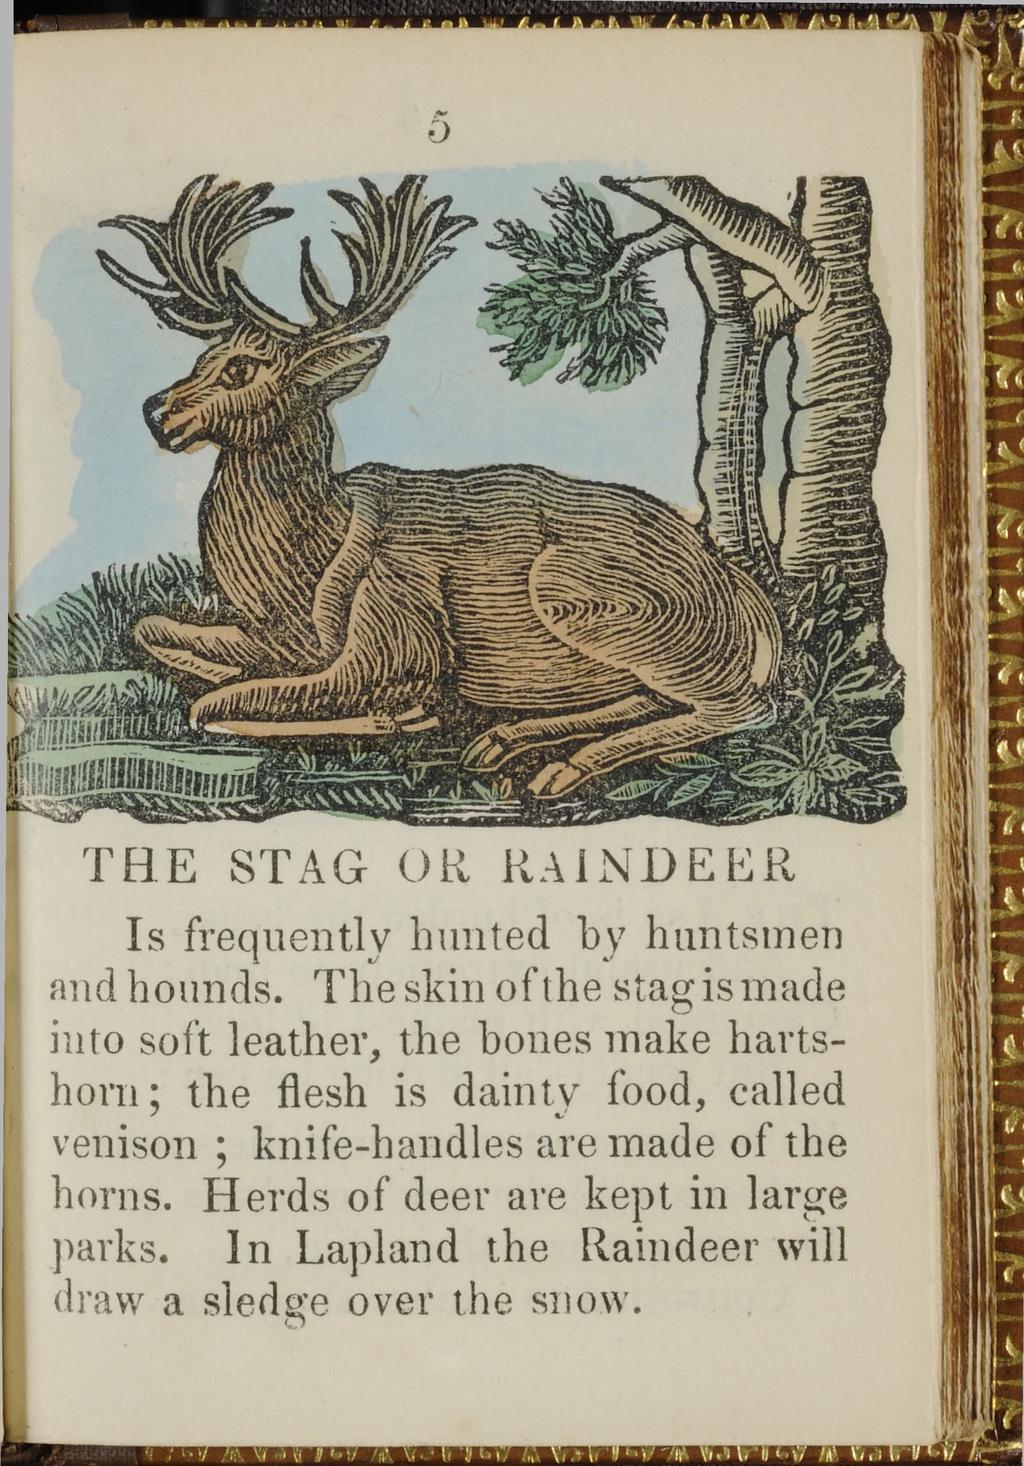 5 THE STAG OR RAINDEER Is frequently hunted by huntsmen and hounds.